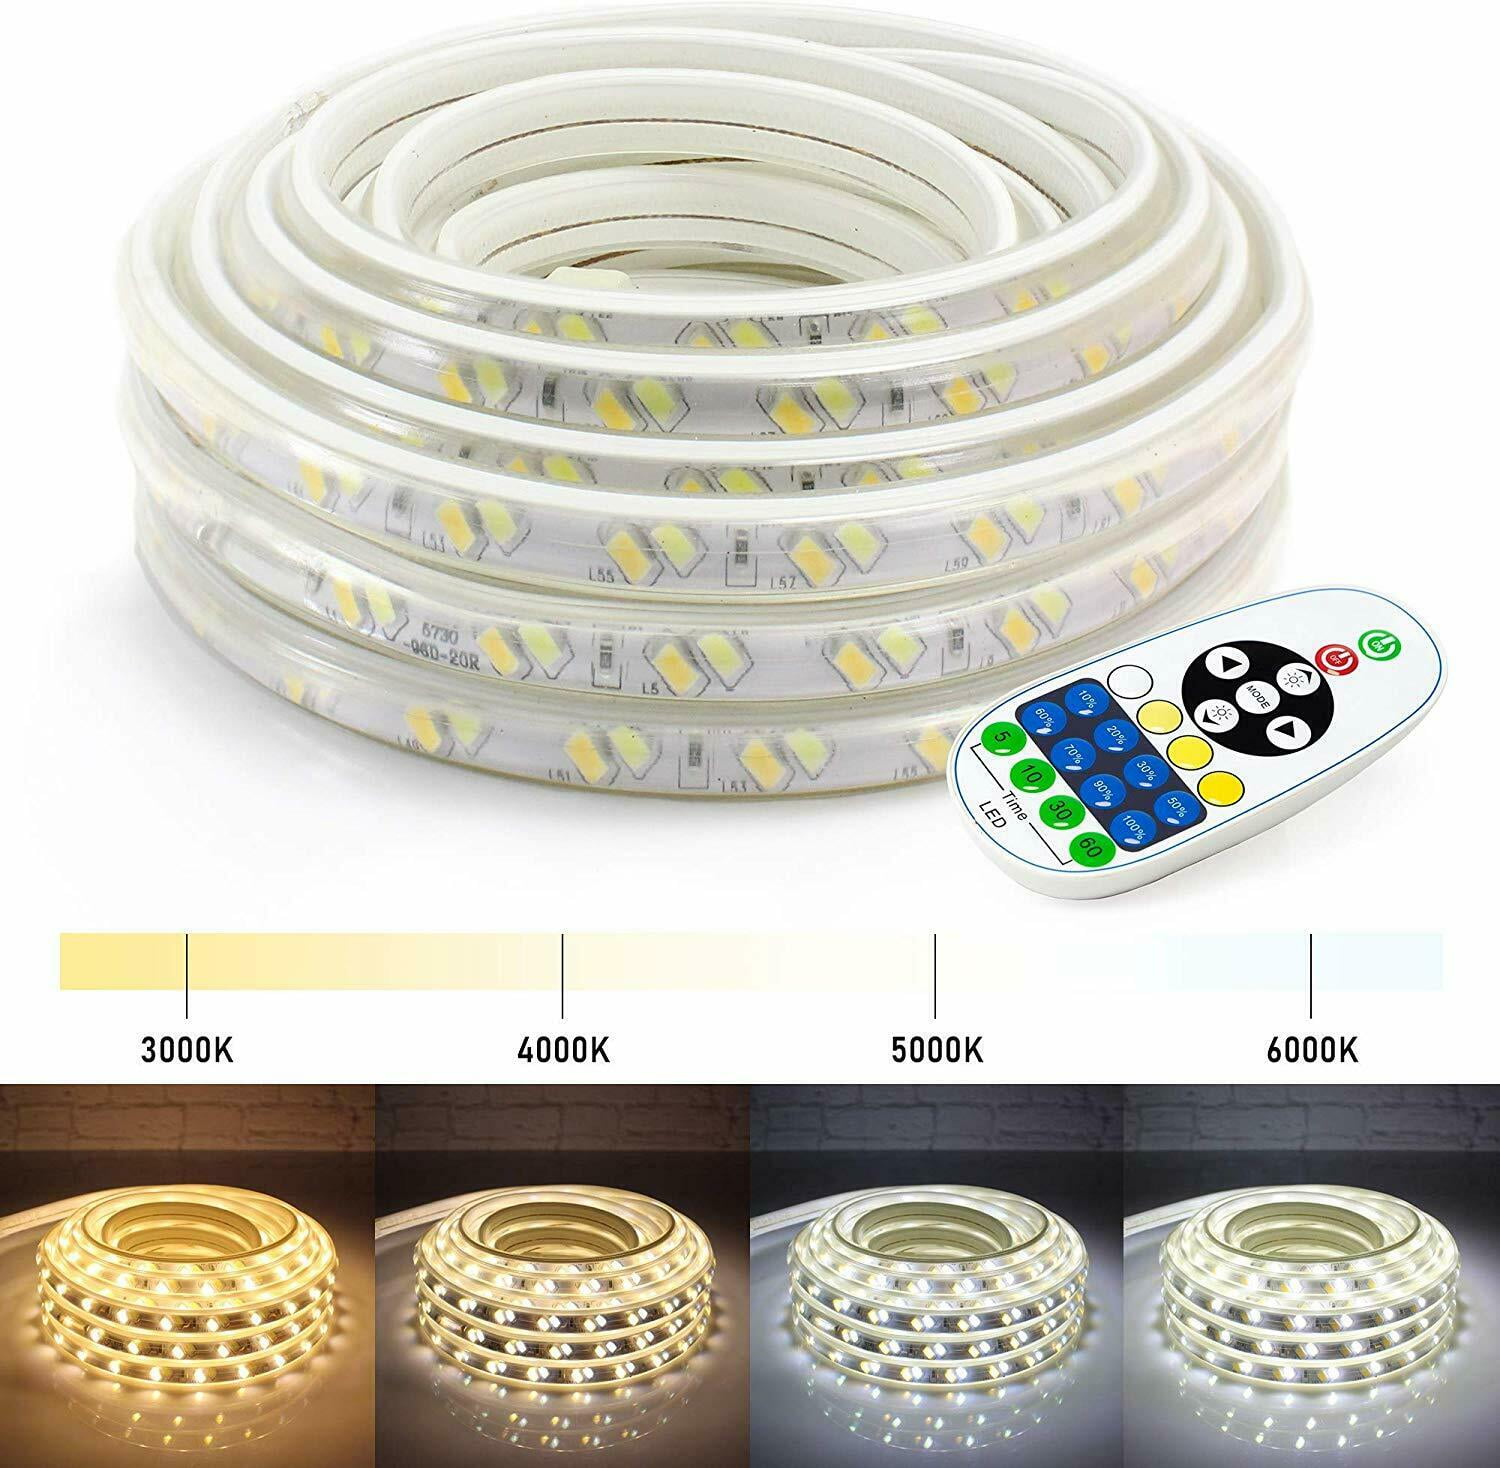 Dolls House Warm White Led Battery Operated Strip 1M Ideal Scenary Lights 